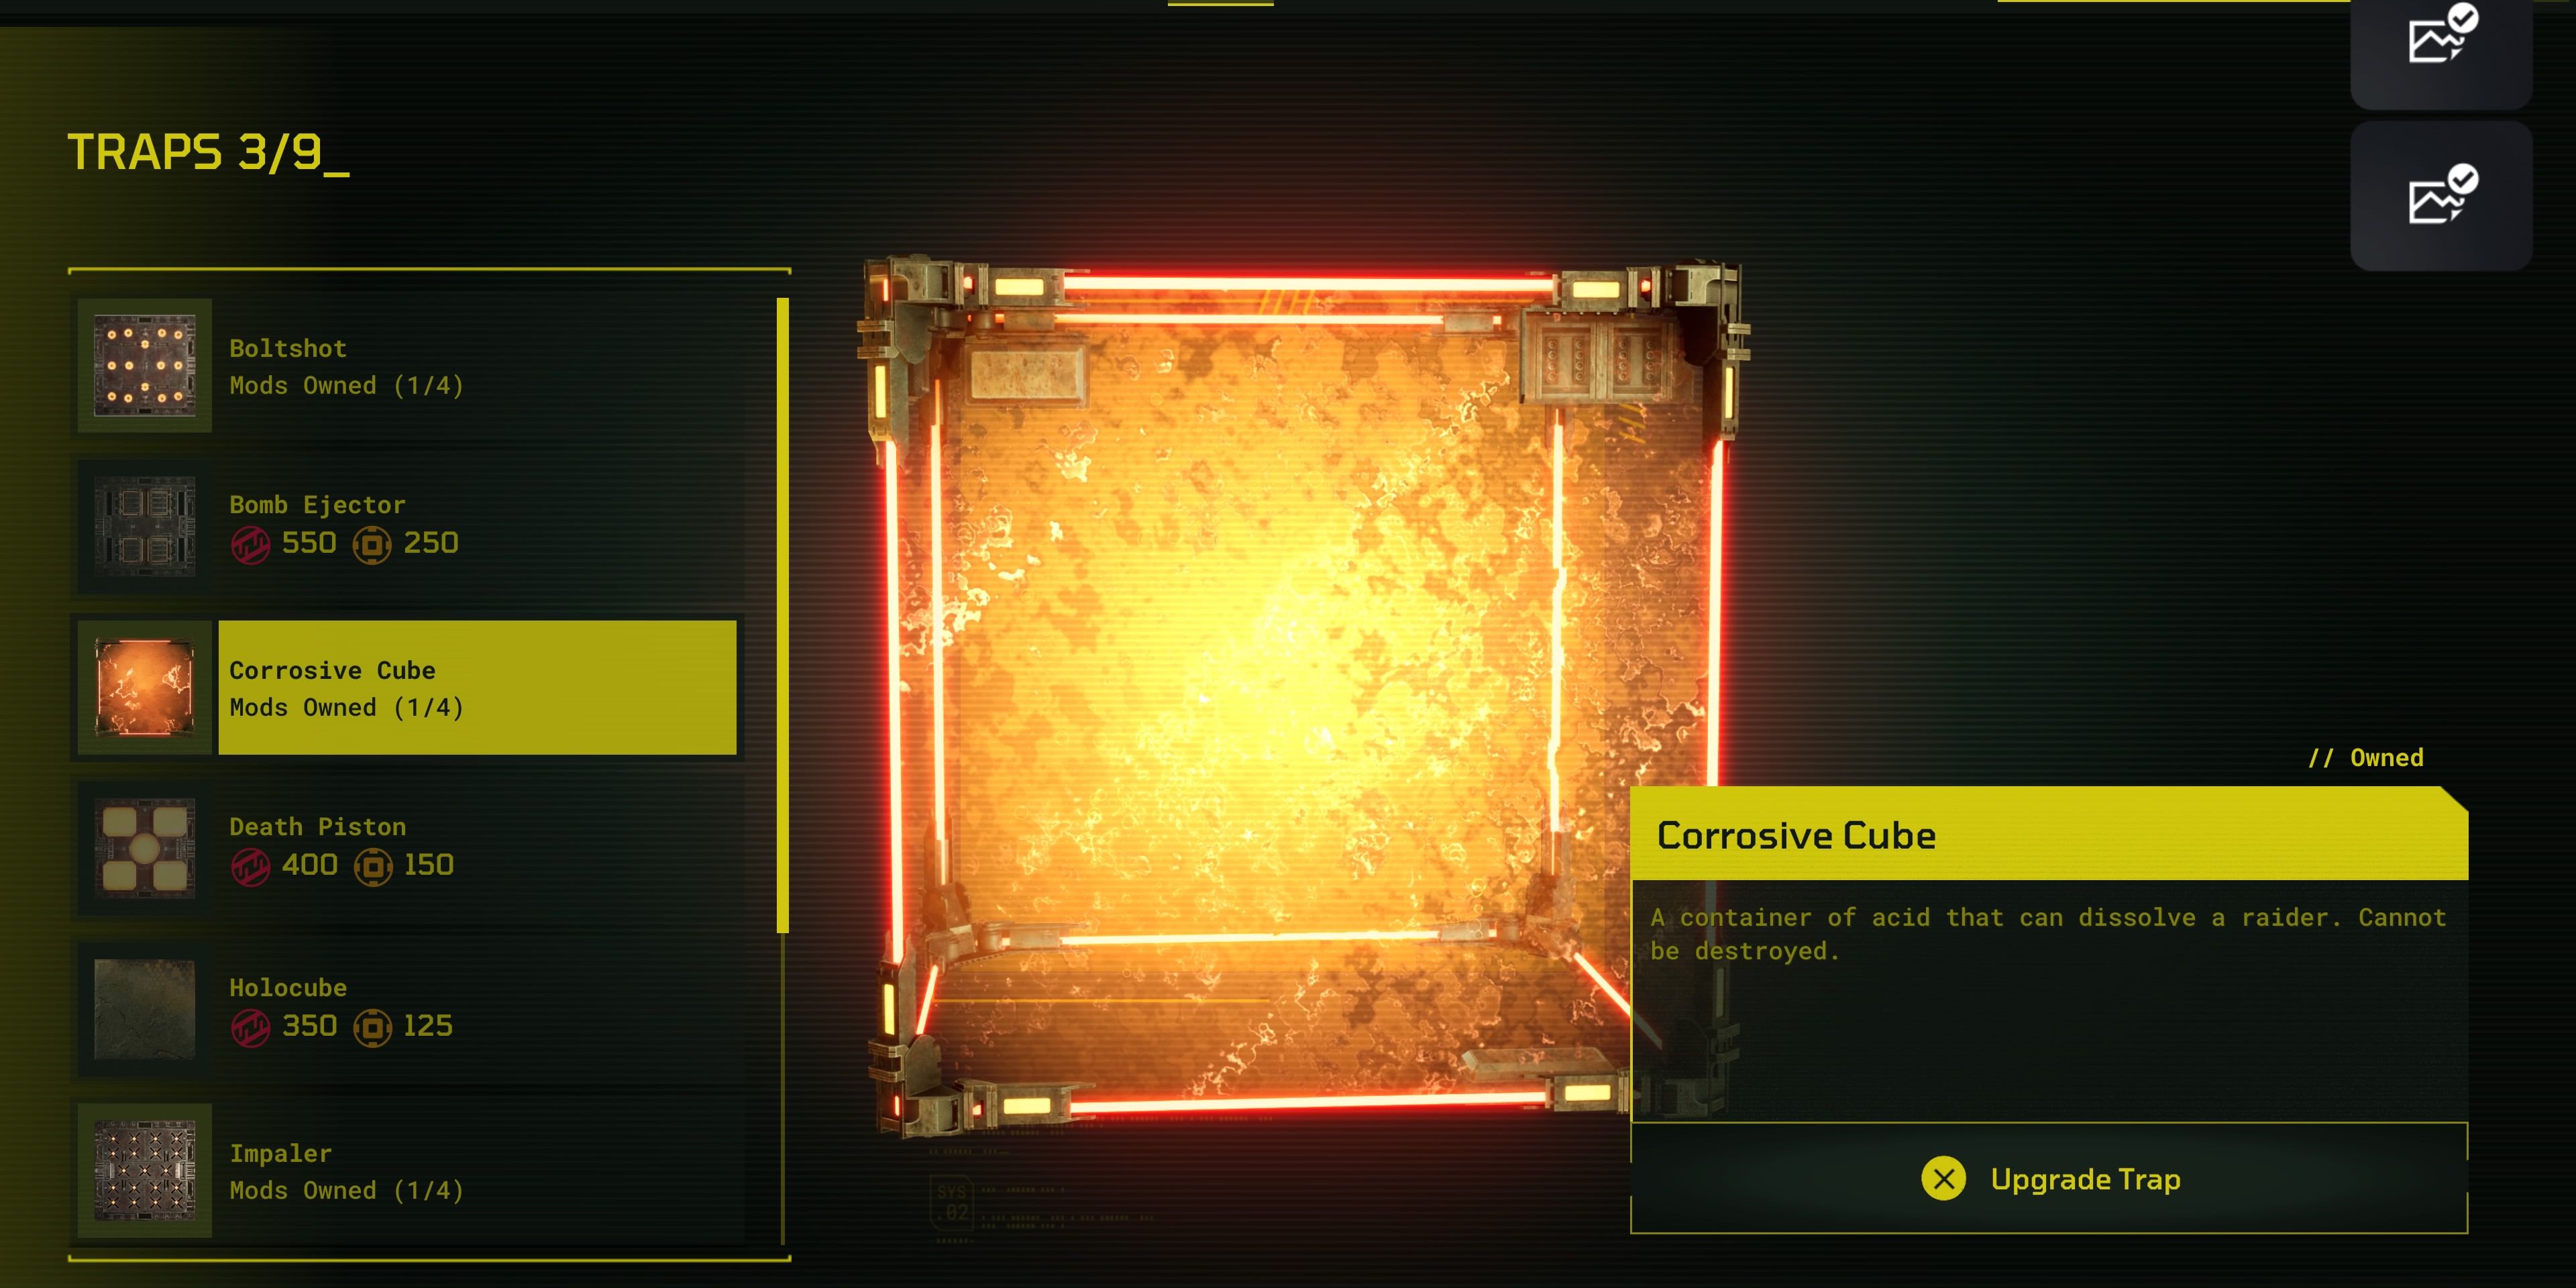 Image shows the glowing corrosive cube trap in Meet Your Maker